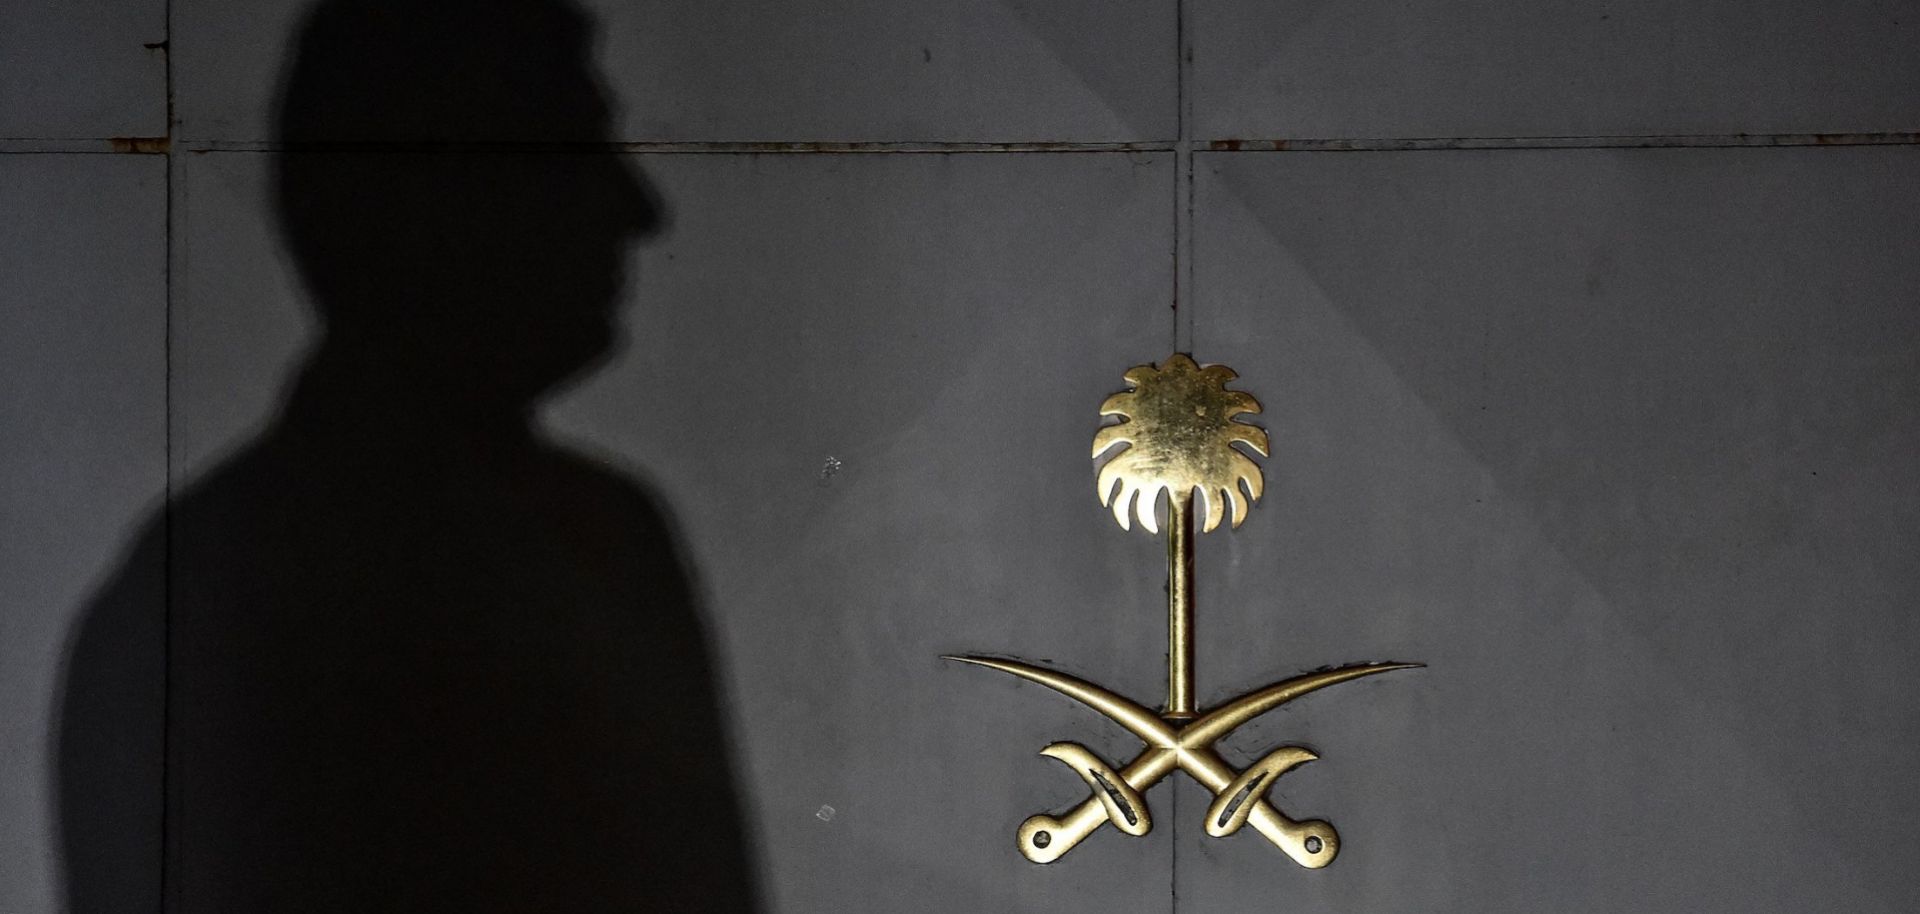 The entrance to the Saudi Arabian Consulate in Istanbul, pictured on Oct. 17, two weeks after Saudi journalist Jamal Khashoggi was killed -- accidentally, Saudi Arabia says -- inside the consulate on Oct. 2.